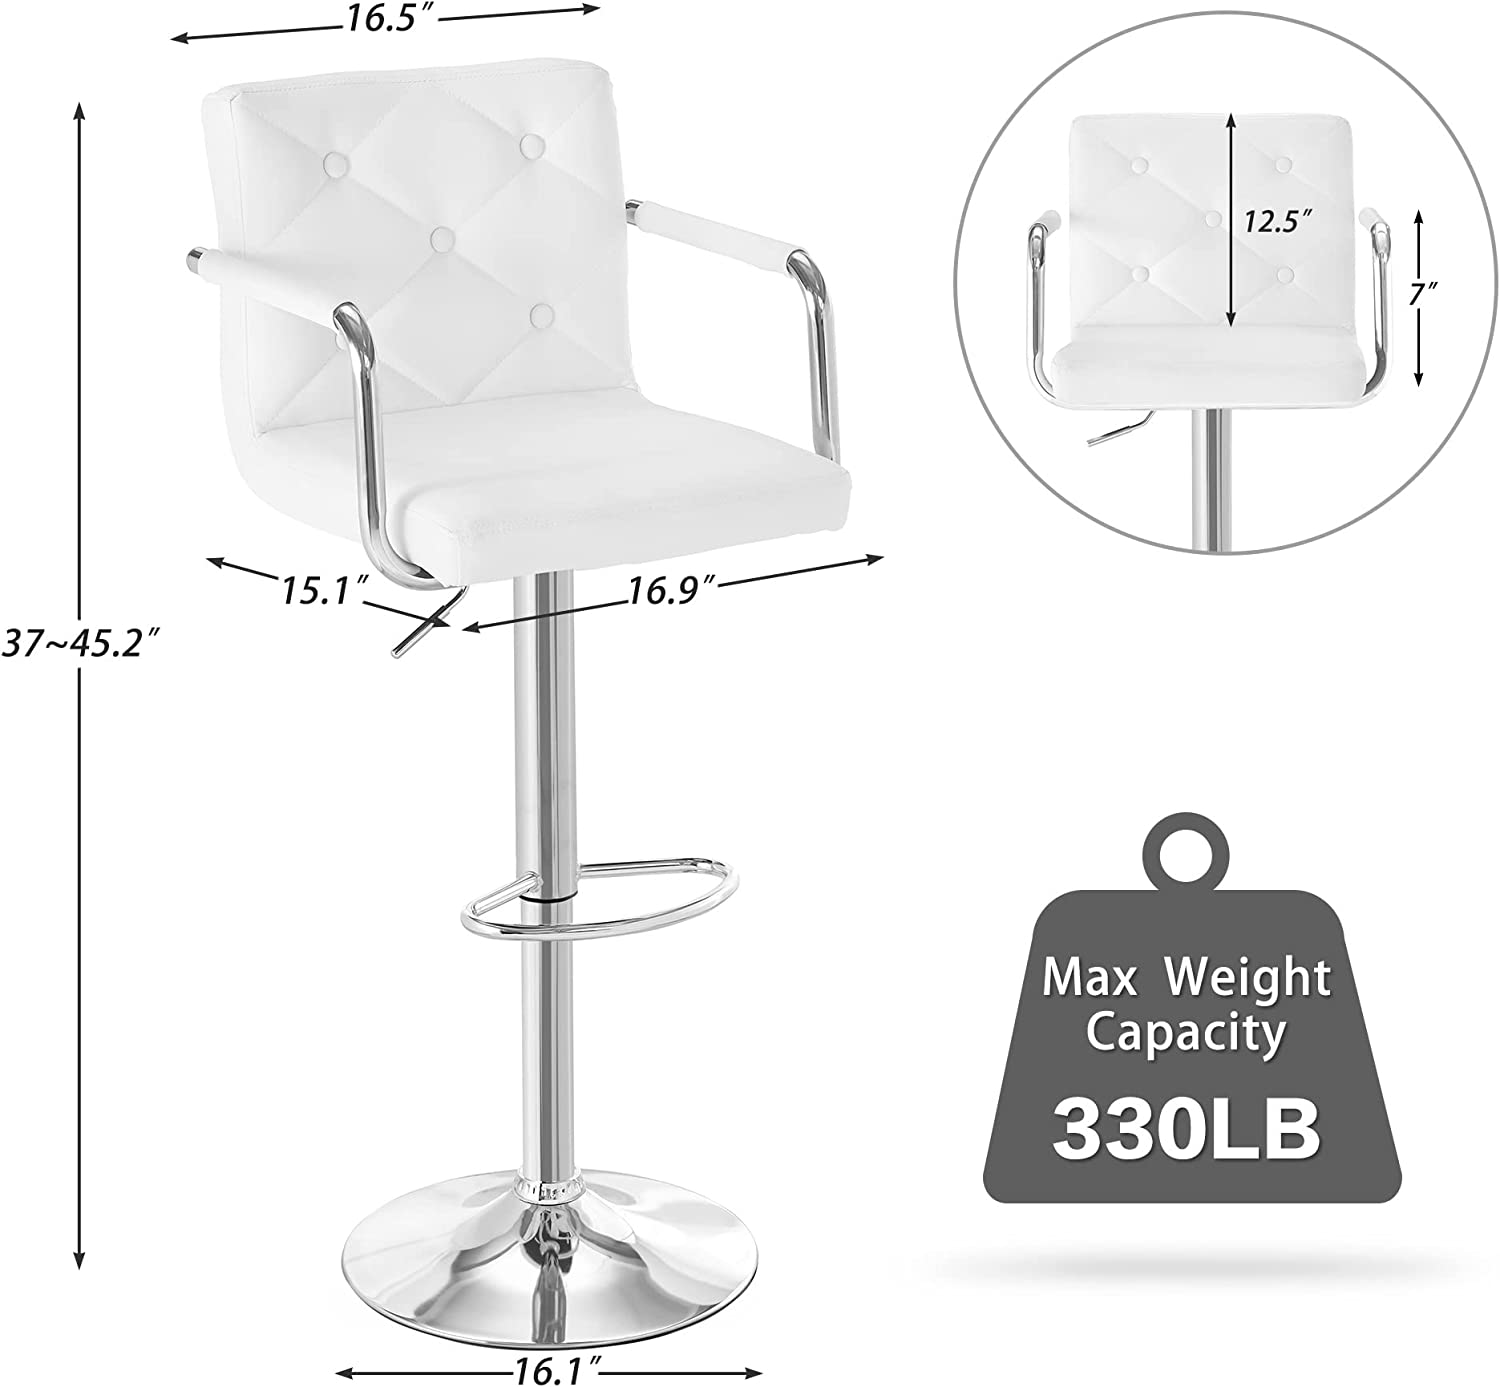 VECELO Adjustable Counter Height Bar Stools Set of 2